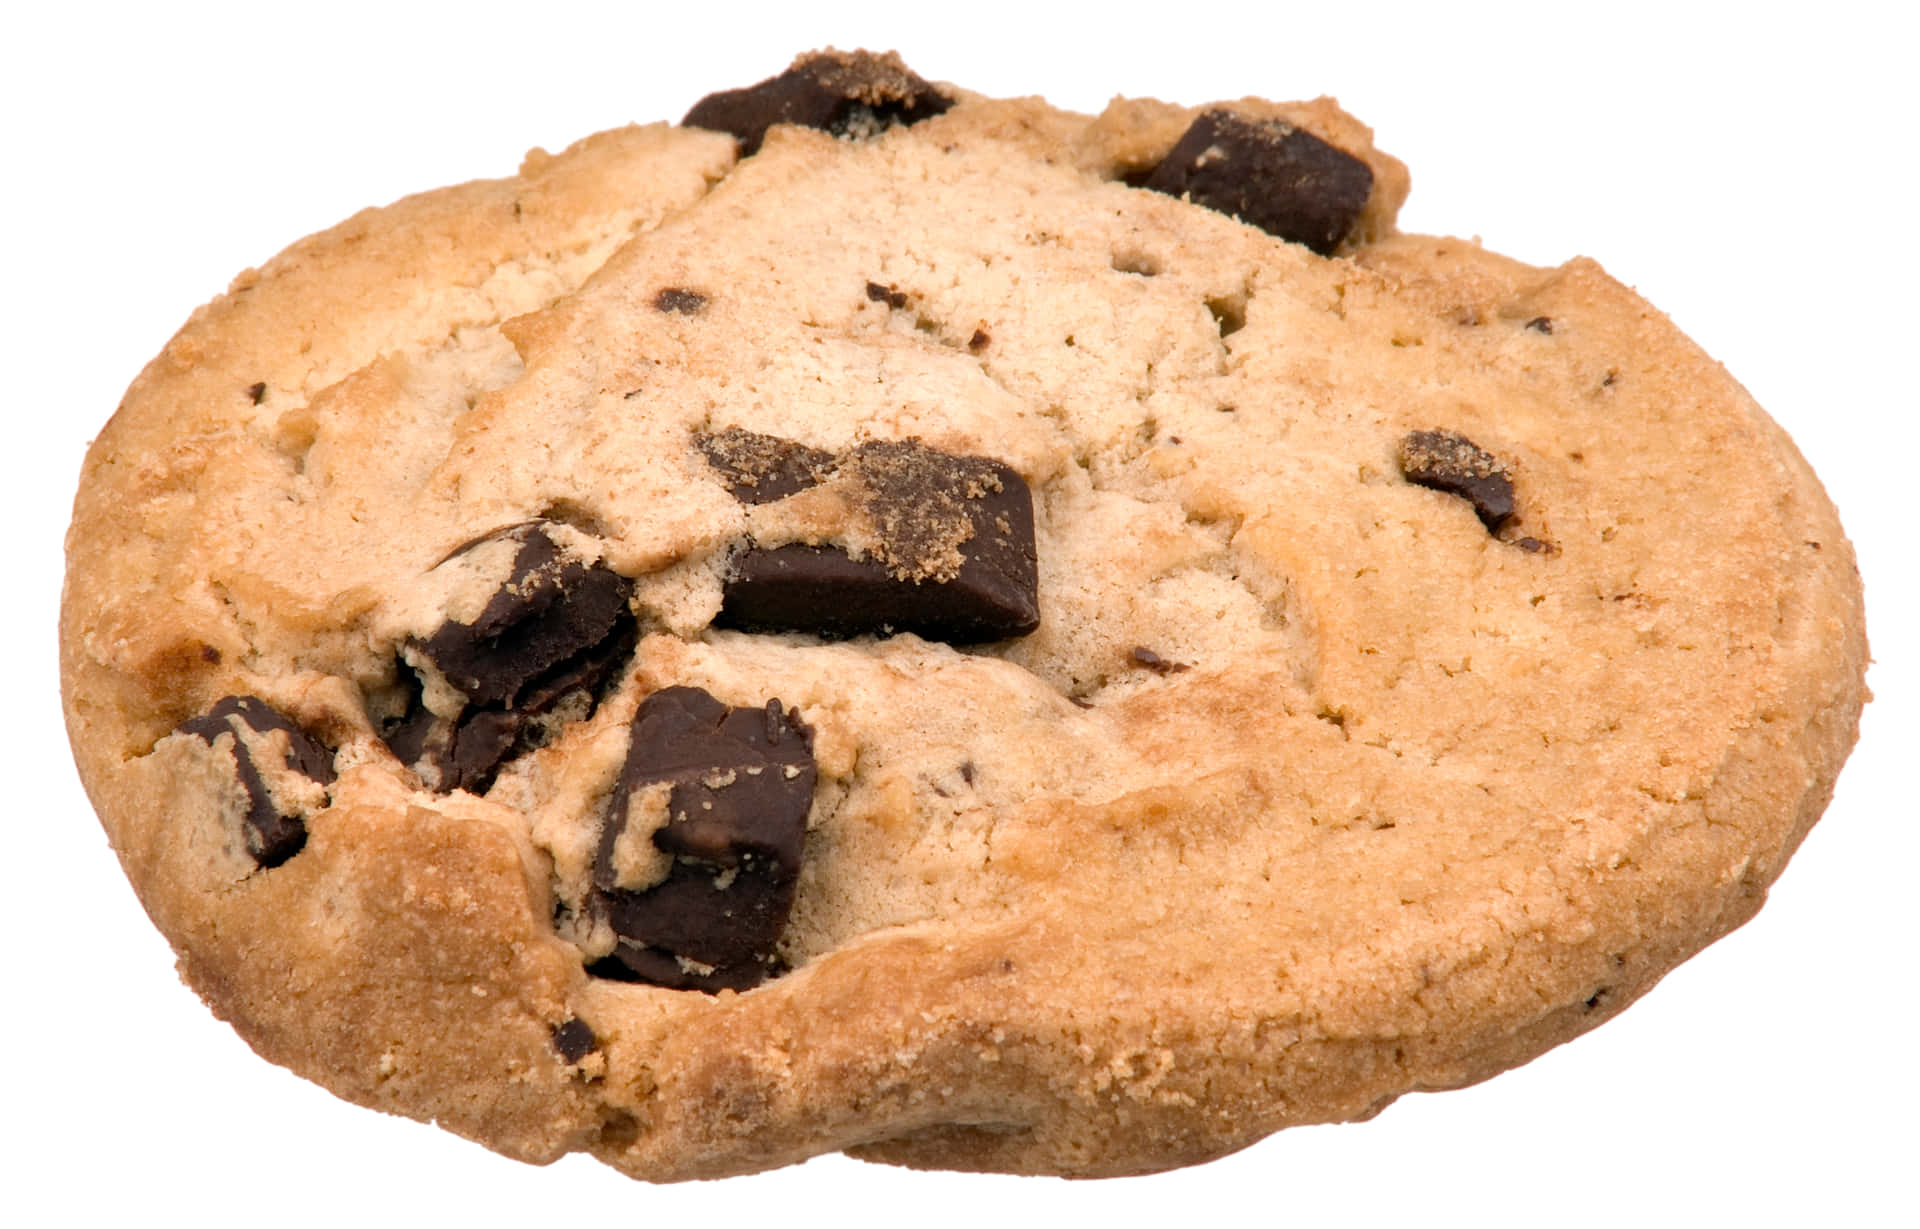 A Chocolate Chip Cookie On A White Background